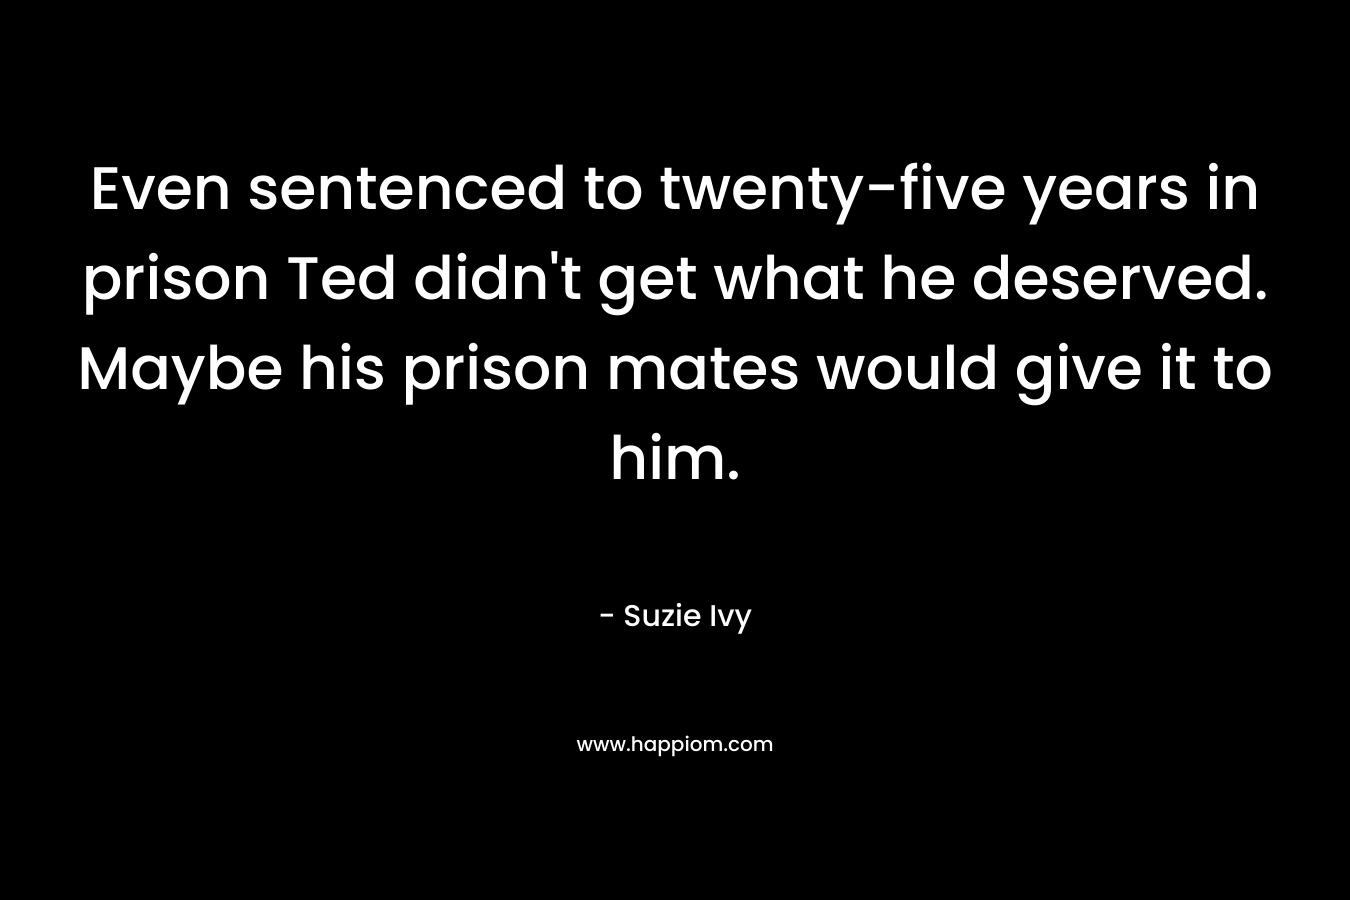 Even sentenced to twenty-five years in prison Ted didn’t get what he deserved. Maybe his prison mates would give it to him. – Suzie Ivy